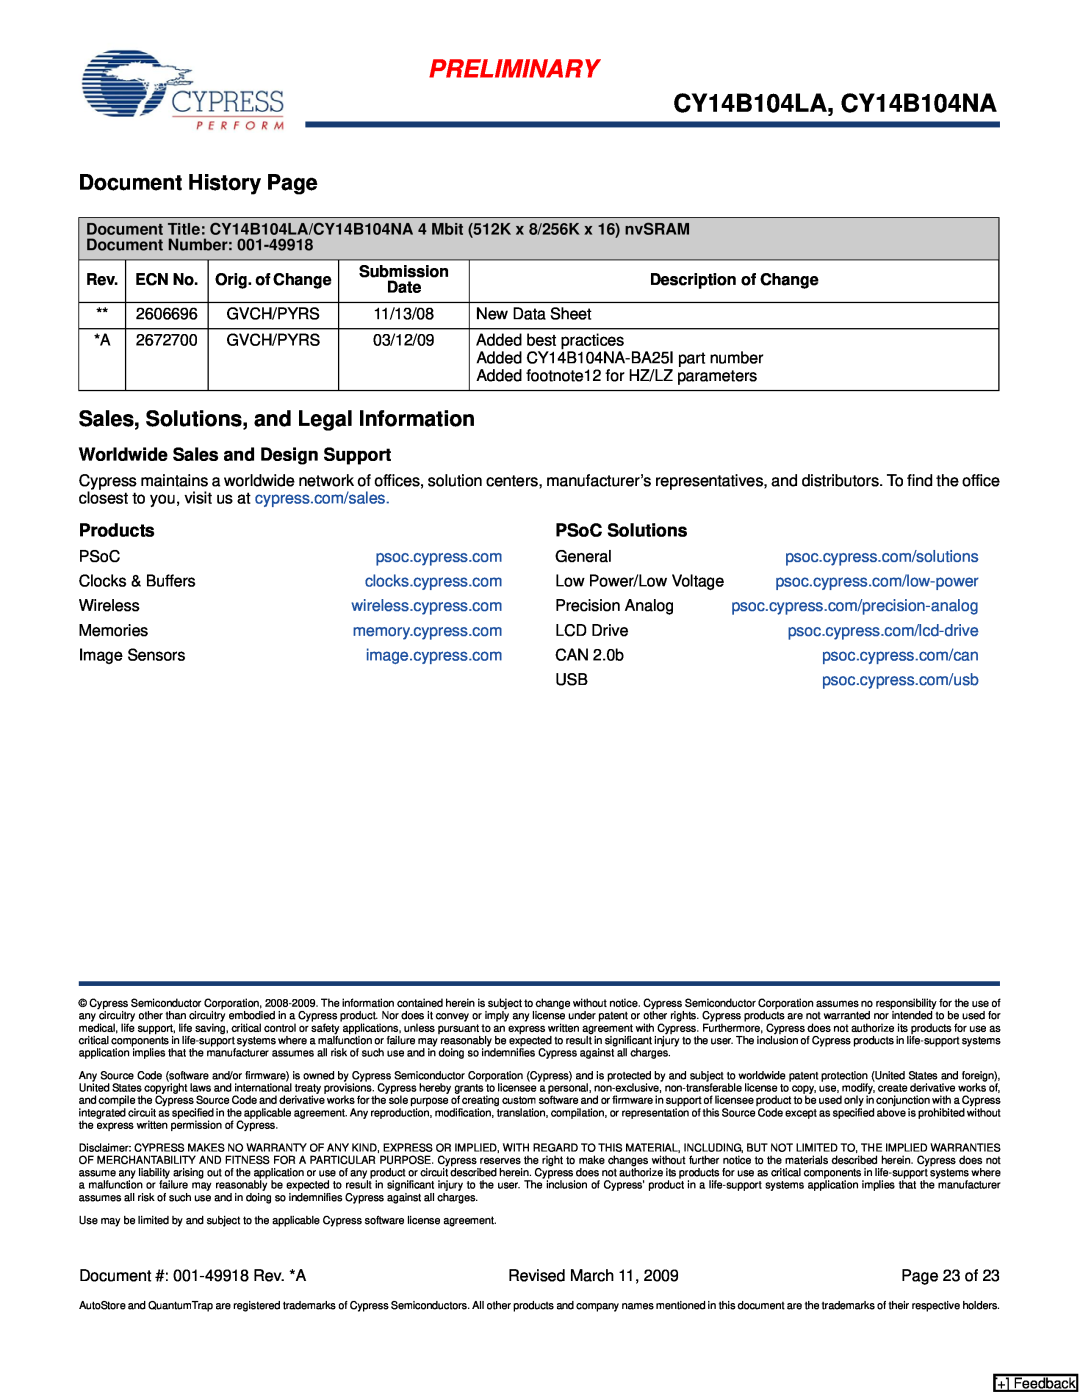 Cypress CY14B104NA Document History Page, Sales, Solutions, and Legal Information, Worldwide Sales and Design Support 